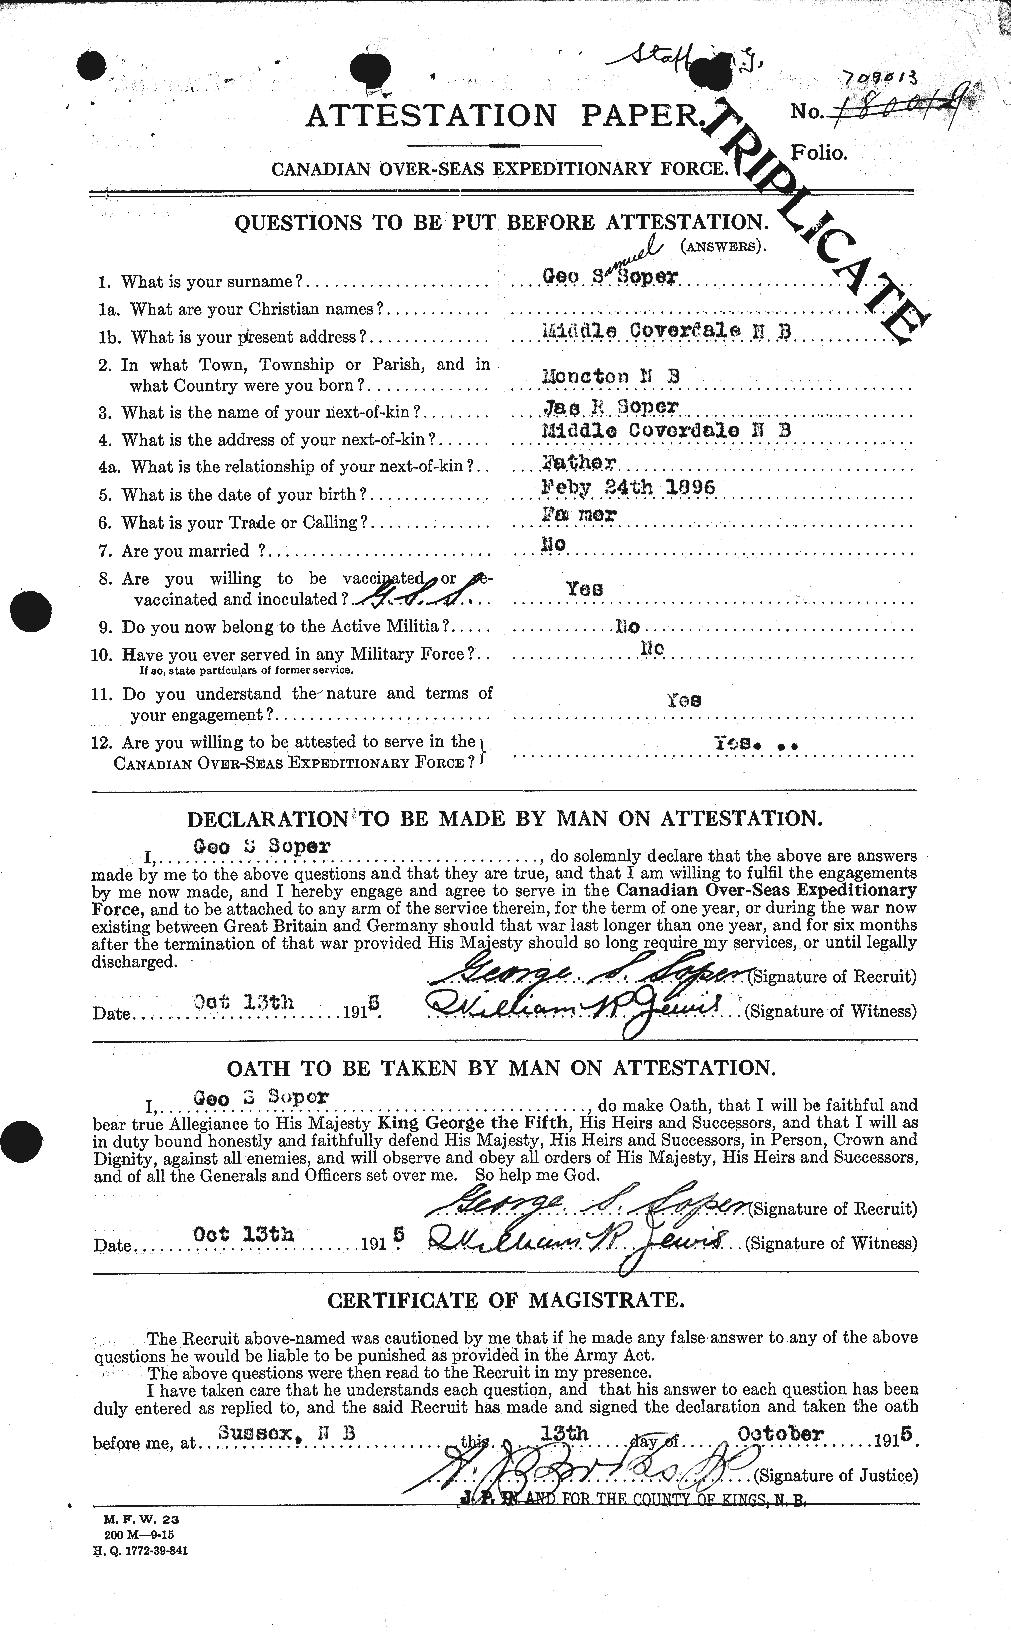 Personnel Records of the First World War - CEF 110929a